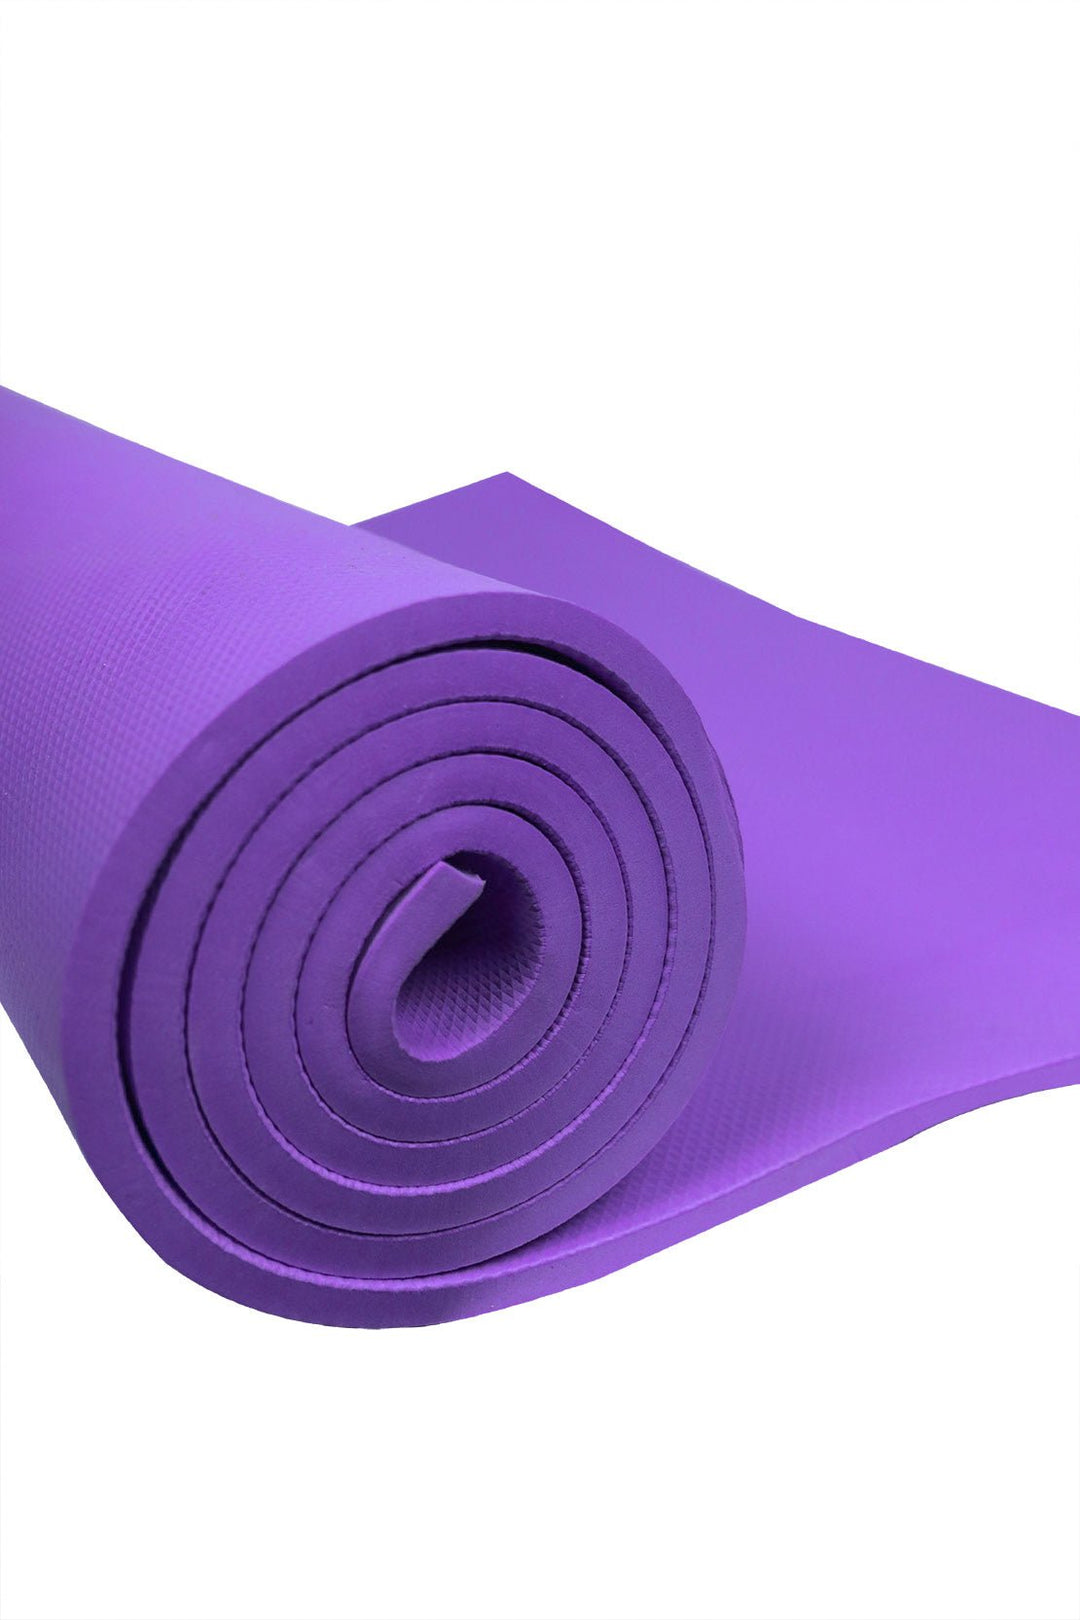 10 mm Thick Yoga Mat for Indoor and Outdoor Use, Purple - V Surfaces